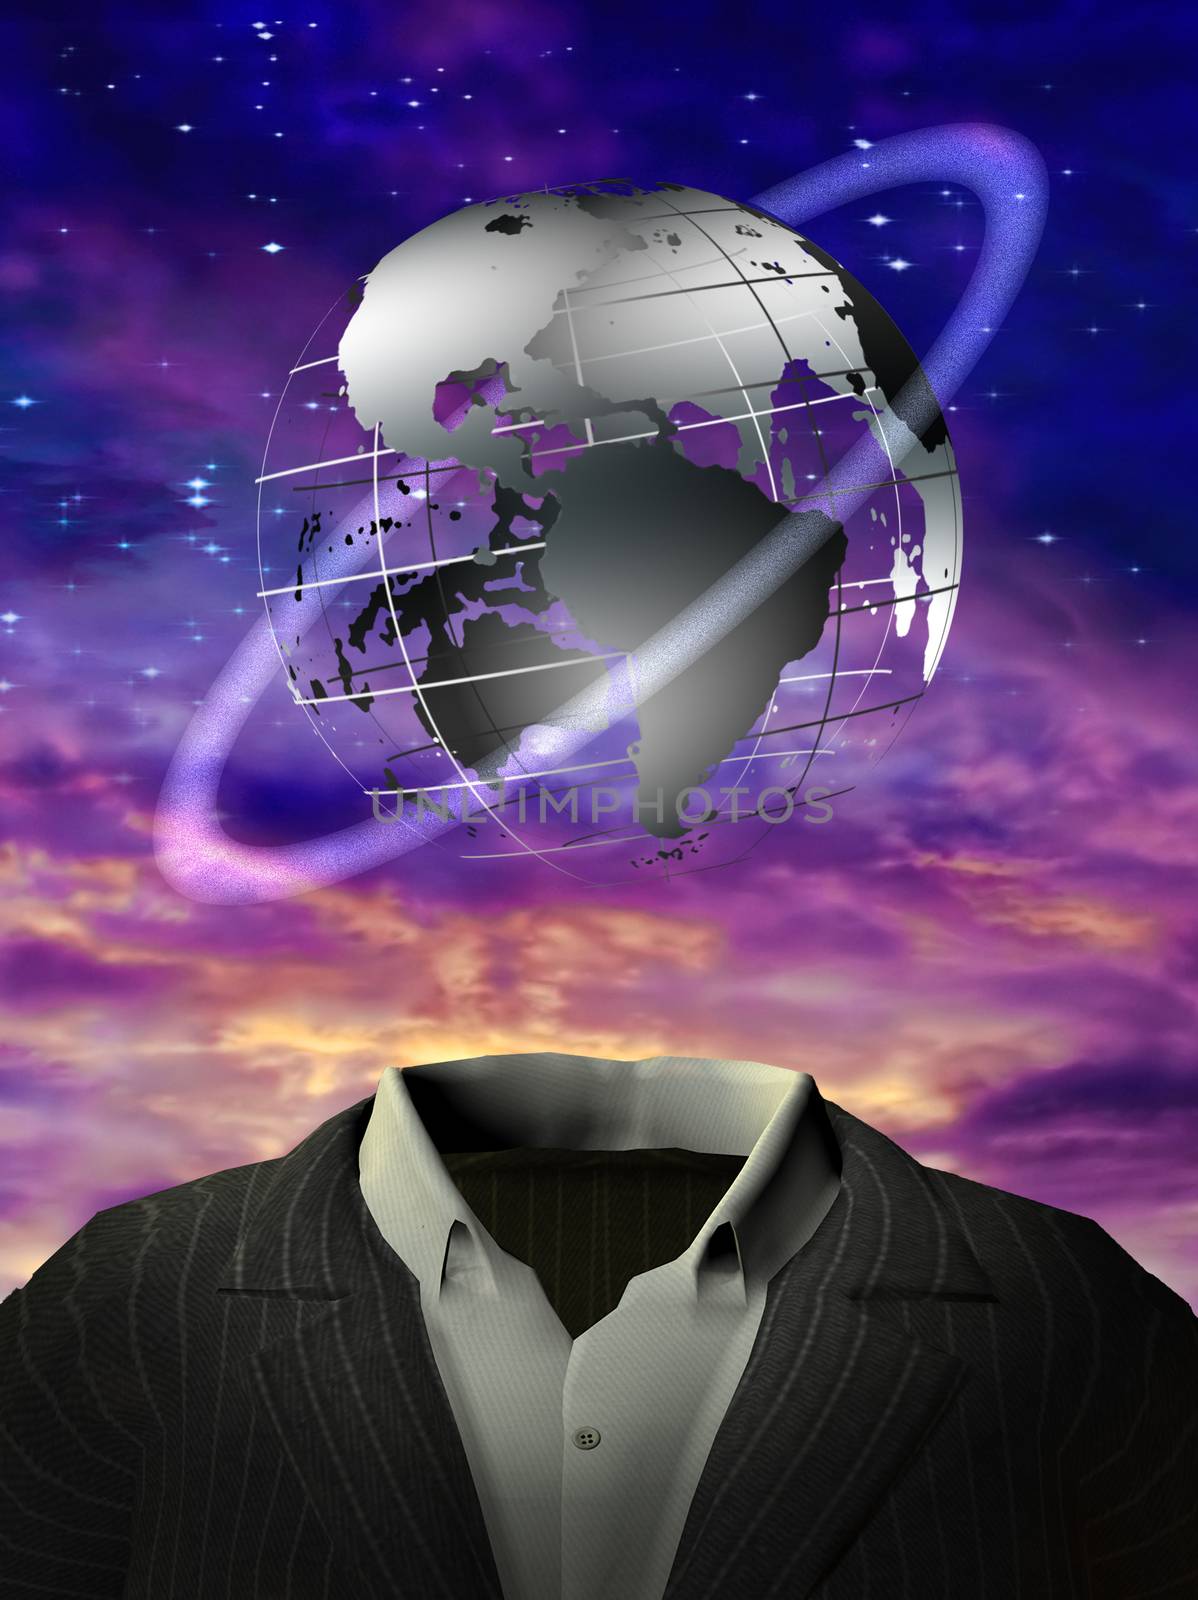 3D rendering. Surrealism. Globe with orbital ring is over man's suit. Purple clouds.